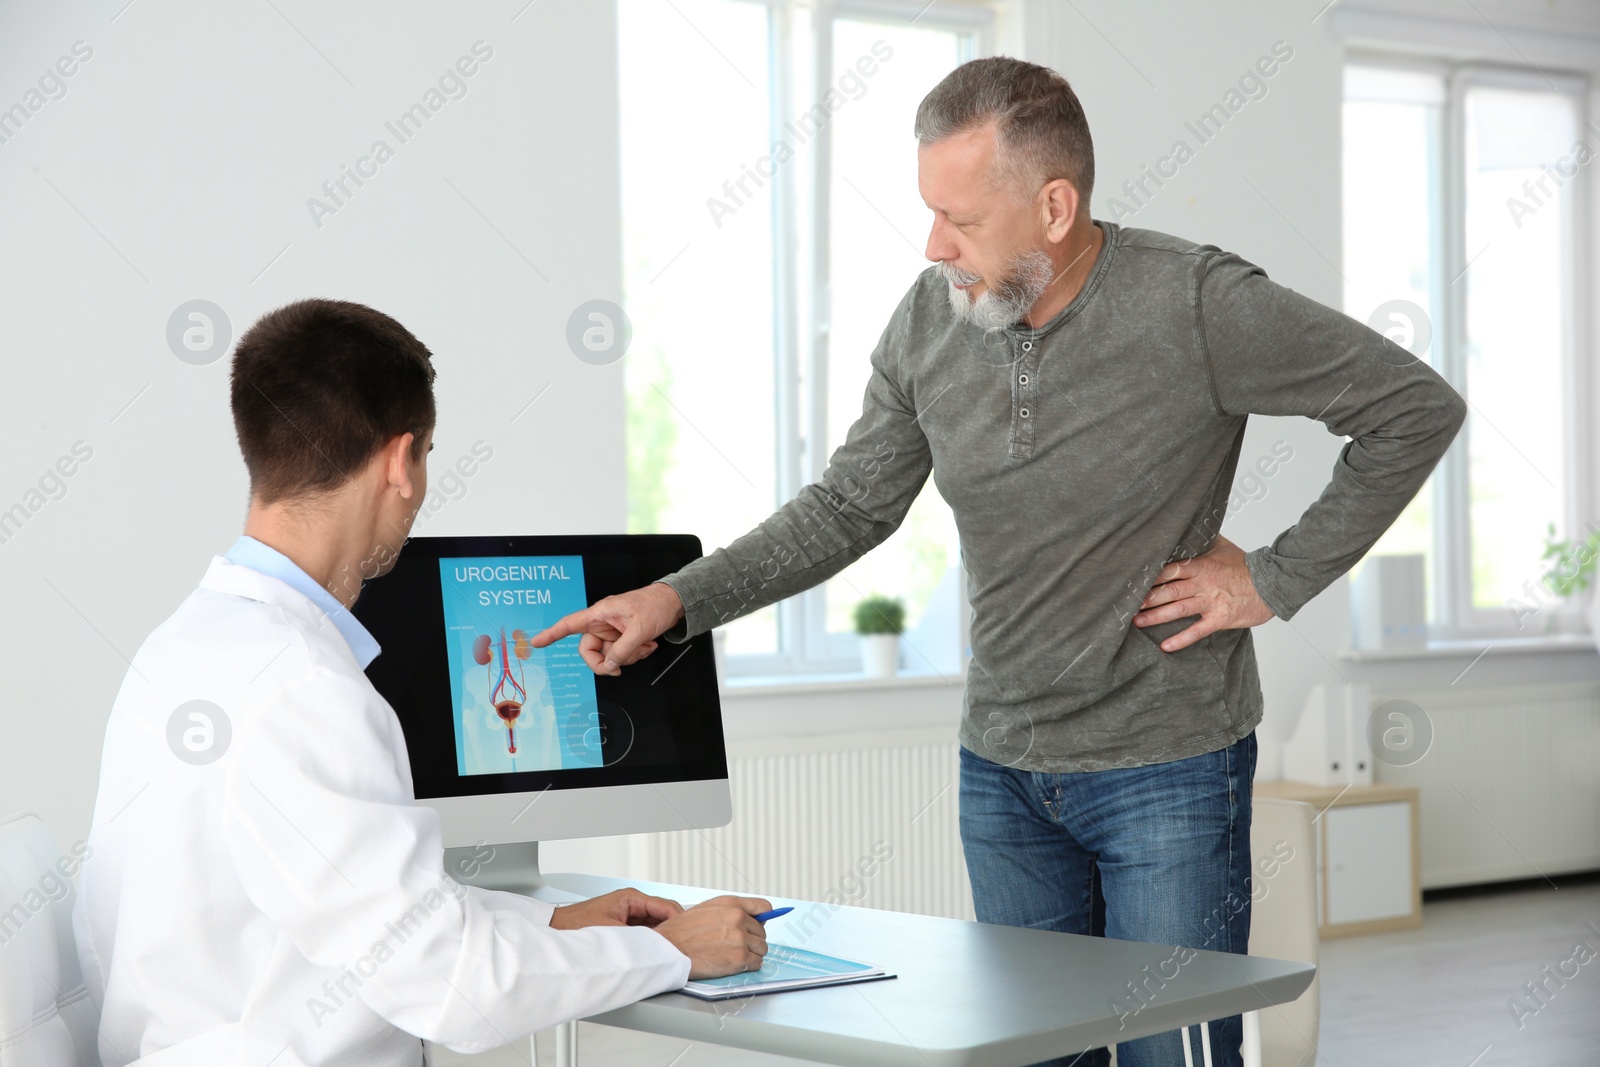 Photo of Man with health problem visiting urologist at hospital